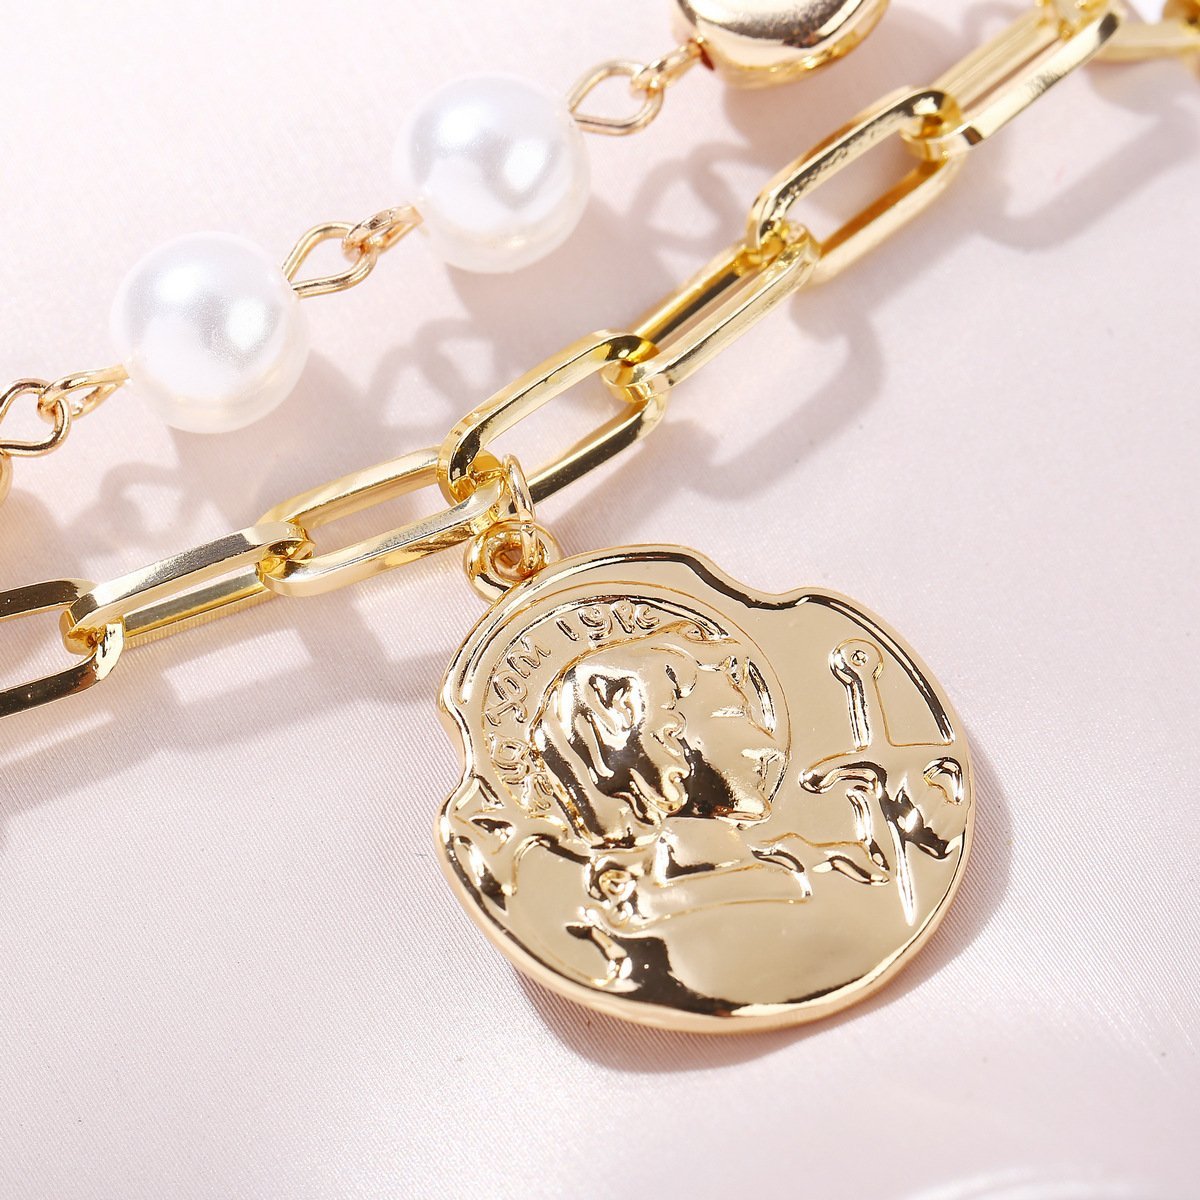 2 Piece Pearl Coin Head Necklace 18K Gold Plated Necklace ITALY Design Elsy Style Necklace